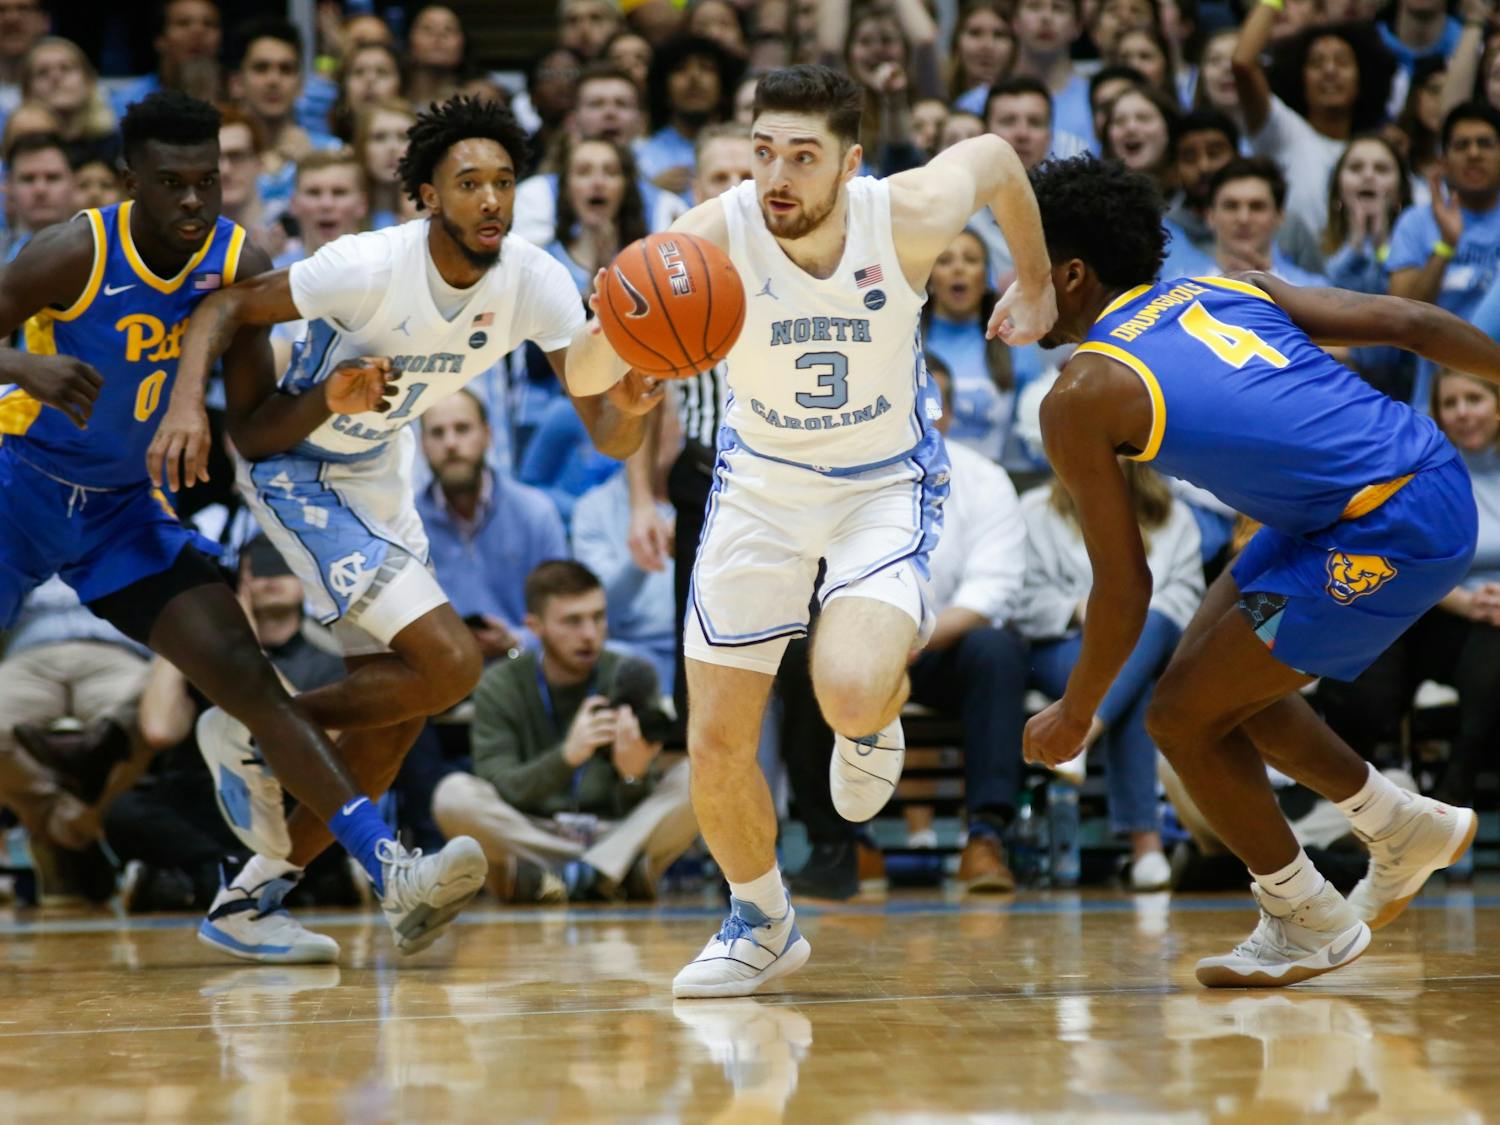 UNC junior guard Andrew Platek (3) runs the ball upcourt during a game against Pitt in the Dean Smith Center on Wednesday, Jan. 8, 2020. The Tar Heels lost to the Panthers 65-73.